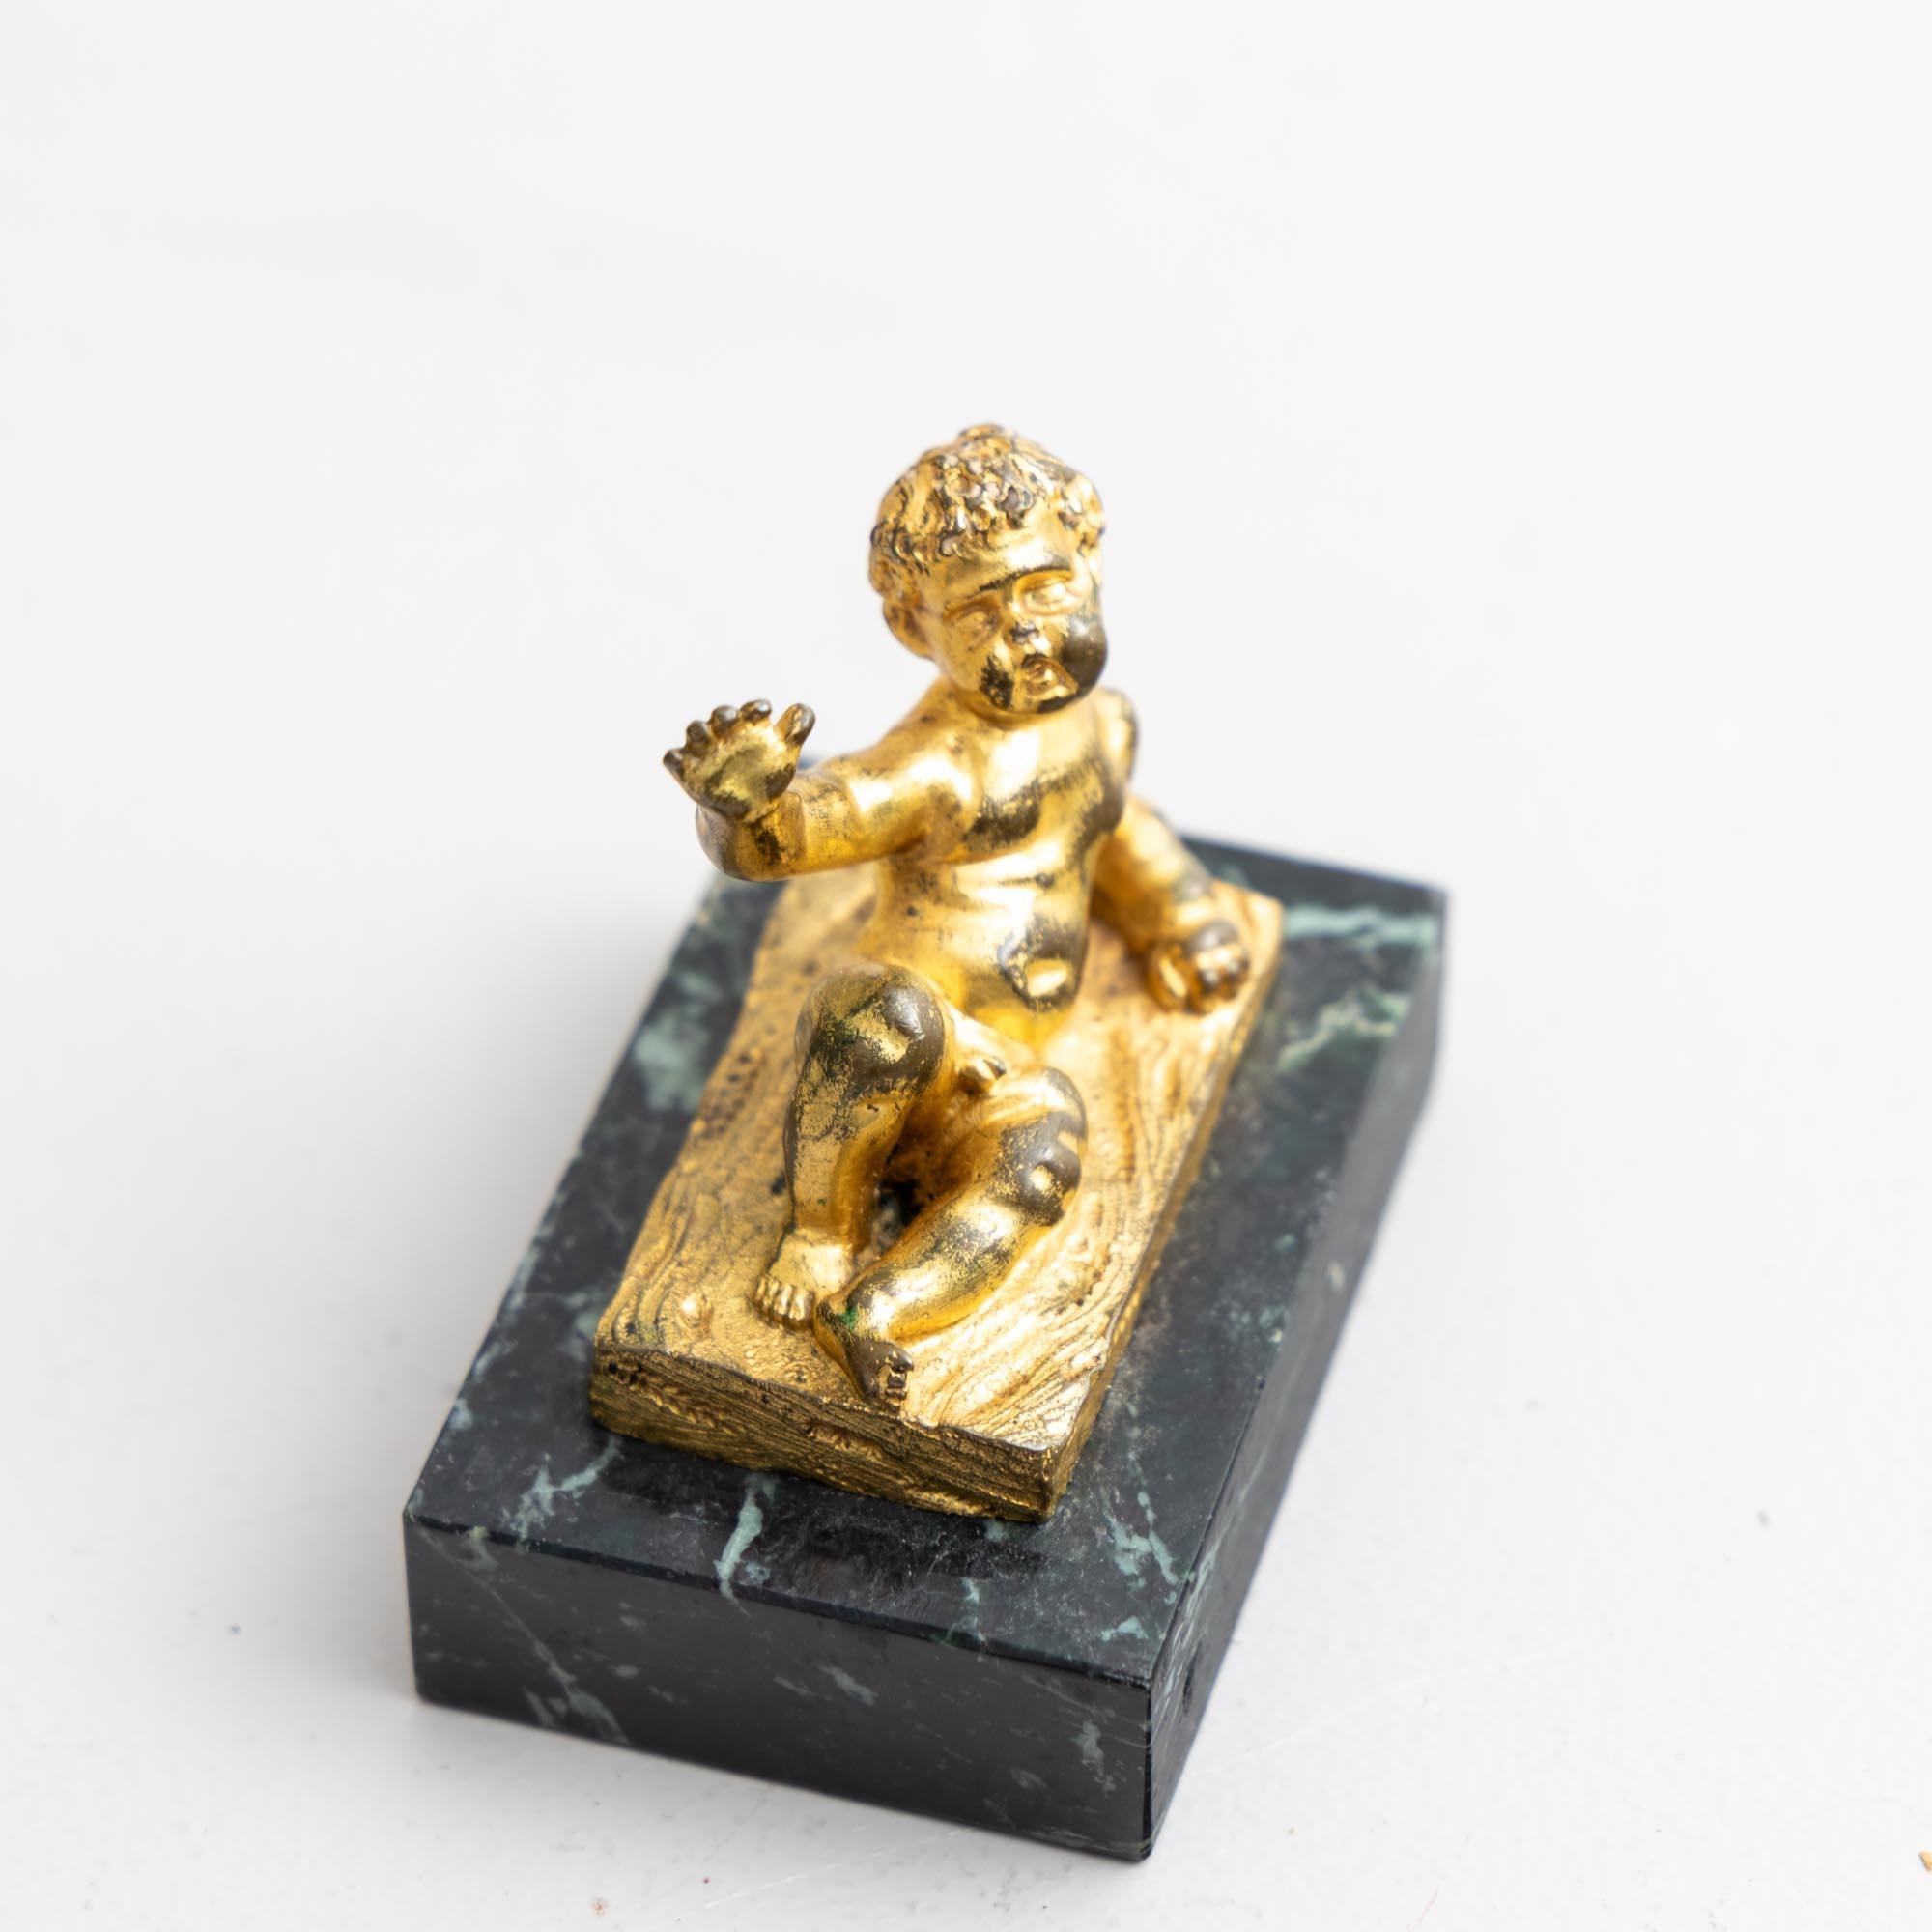 Small reclining putto of gilt bronze in an expansive gesture. The small bronze is mounted on a dark marble base. The gilding is rubbed in places.